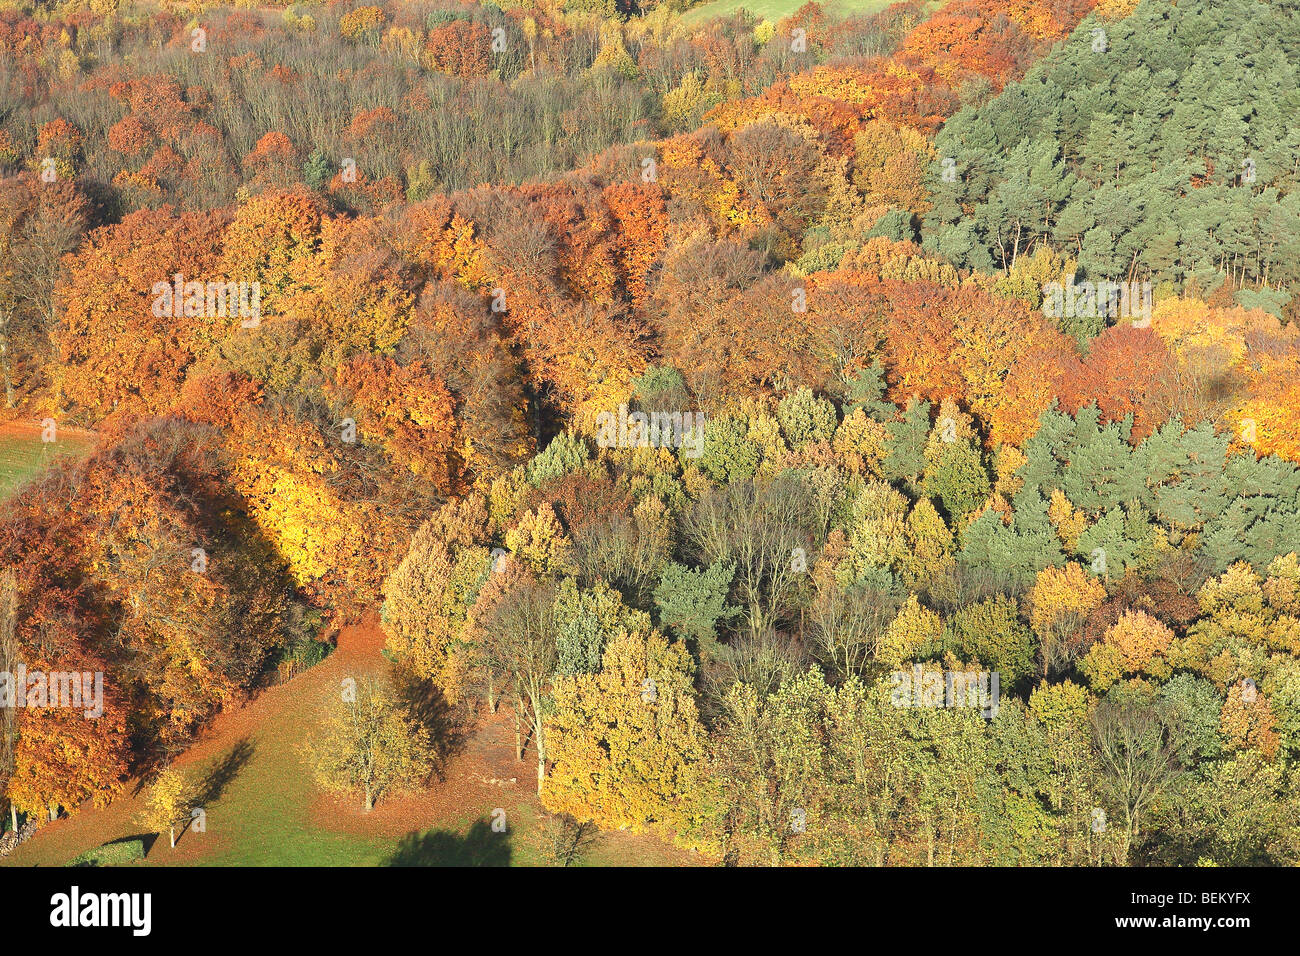 Mixed forest with Oak (Quercus robur) Beech (Fagus sylvatica) and Birches (Betula sp.) with pine forest, fields and grasslands i Stock Photo